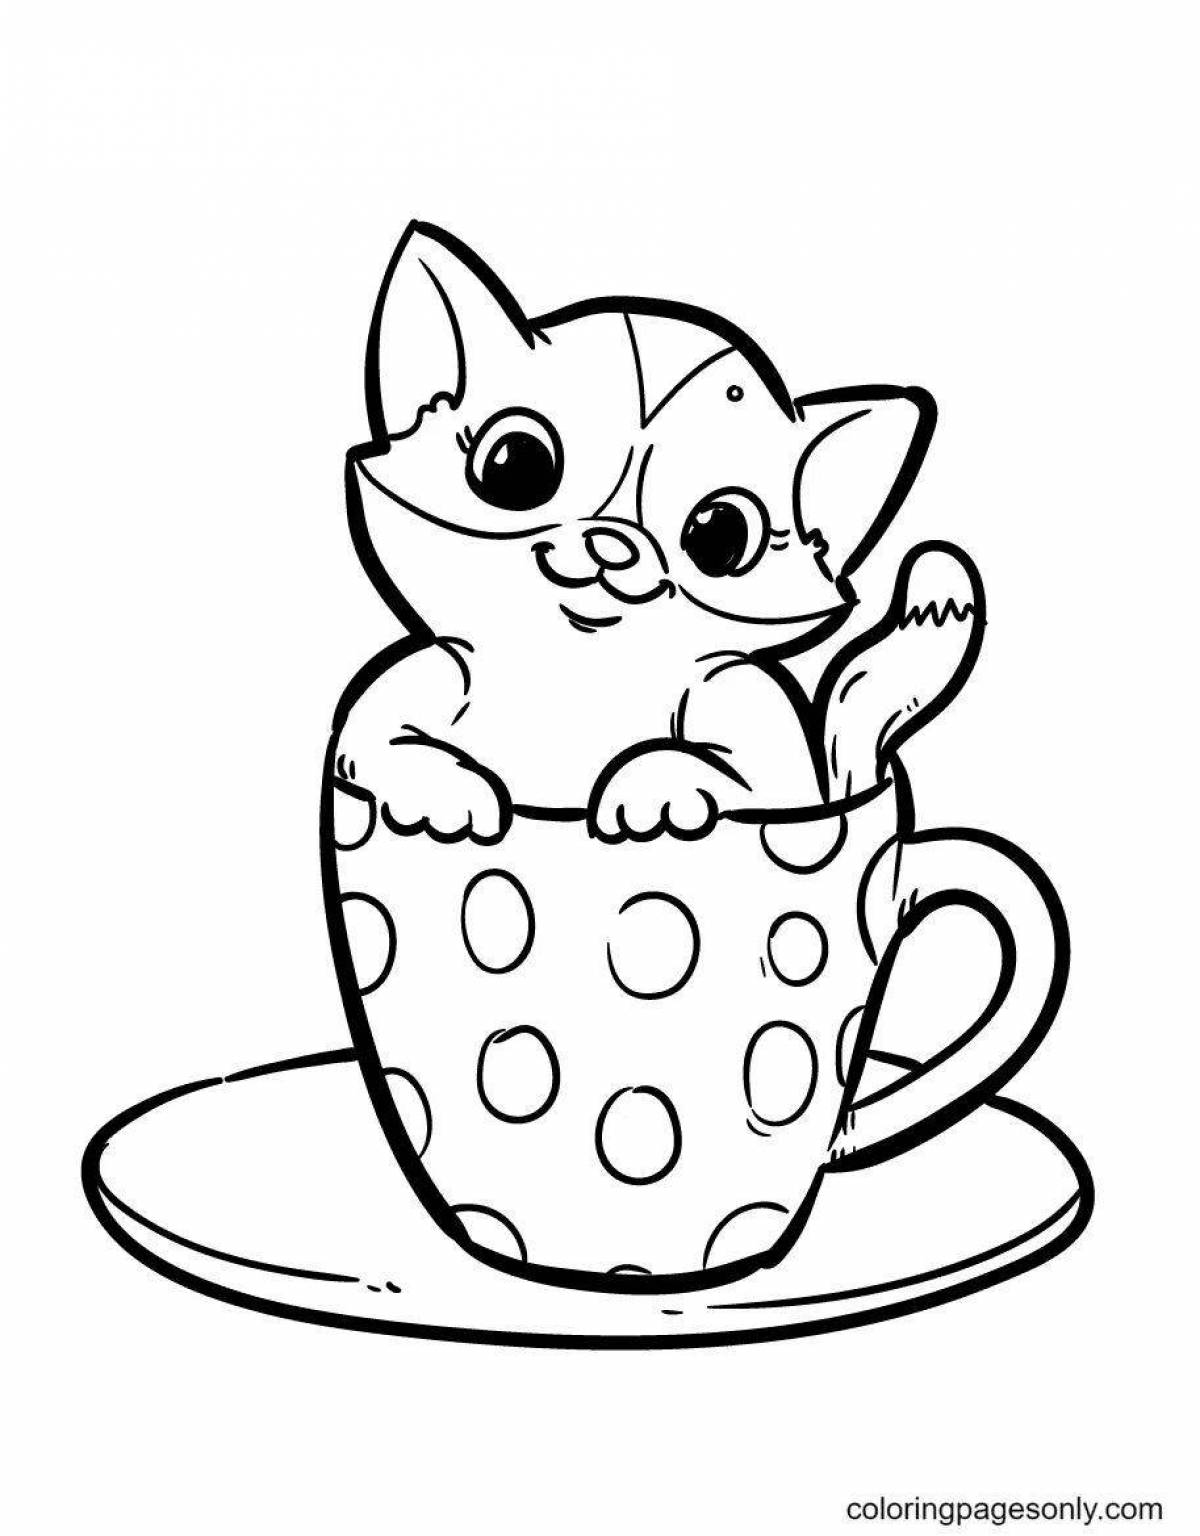 Coloring page inquisitive cat in a cup